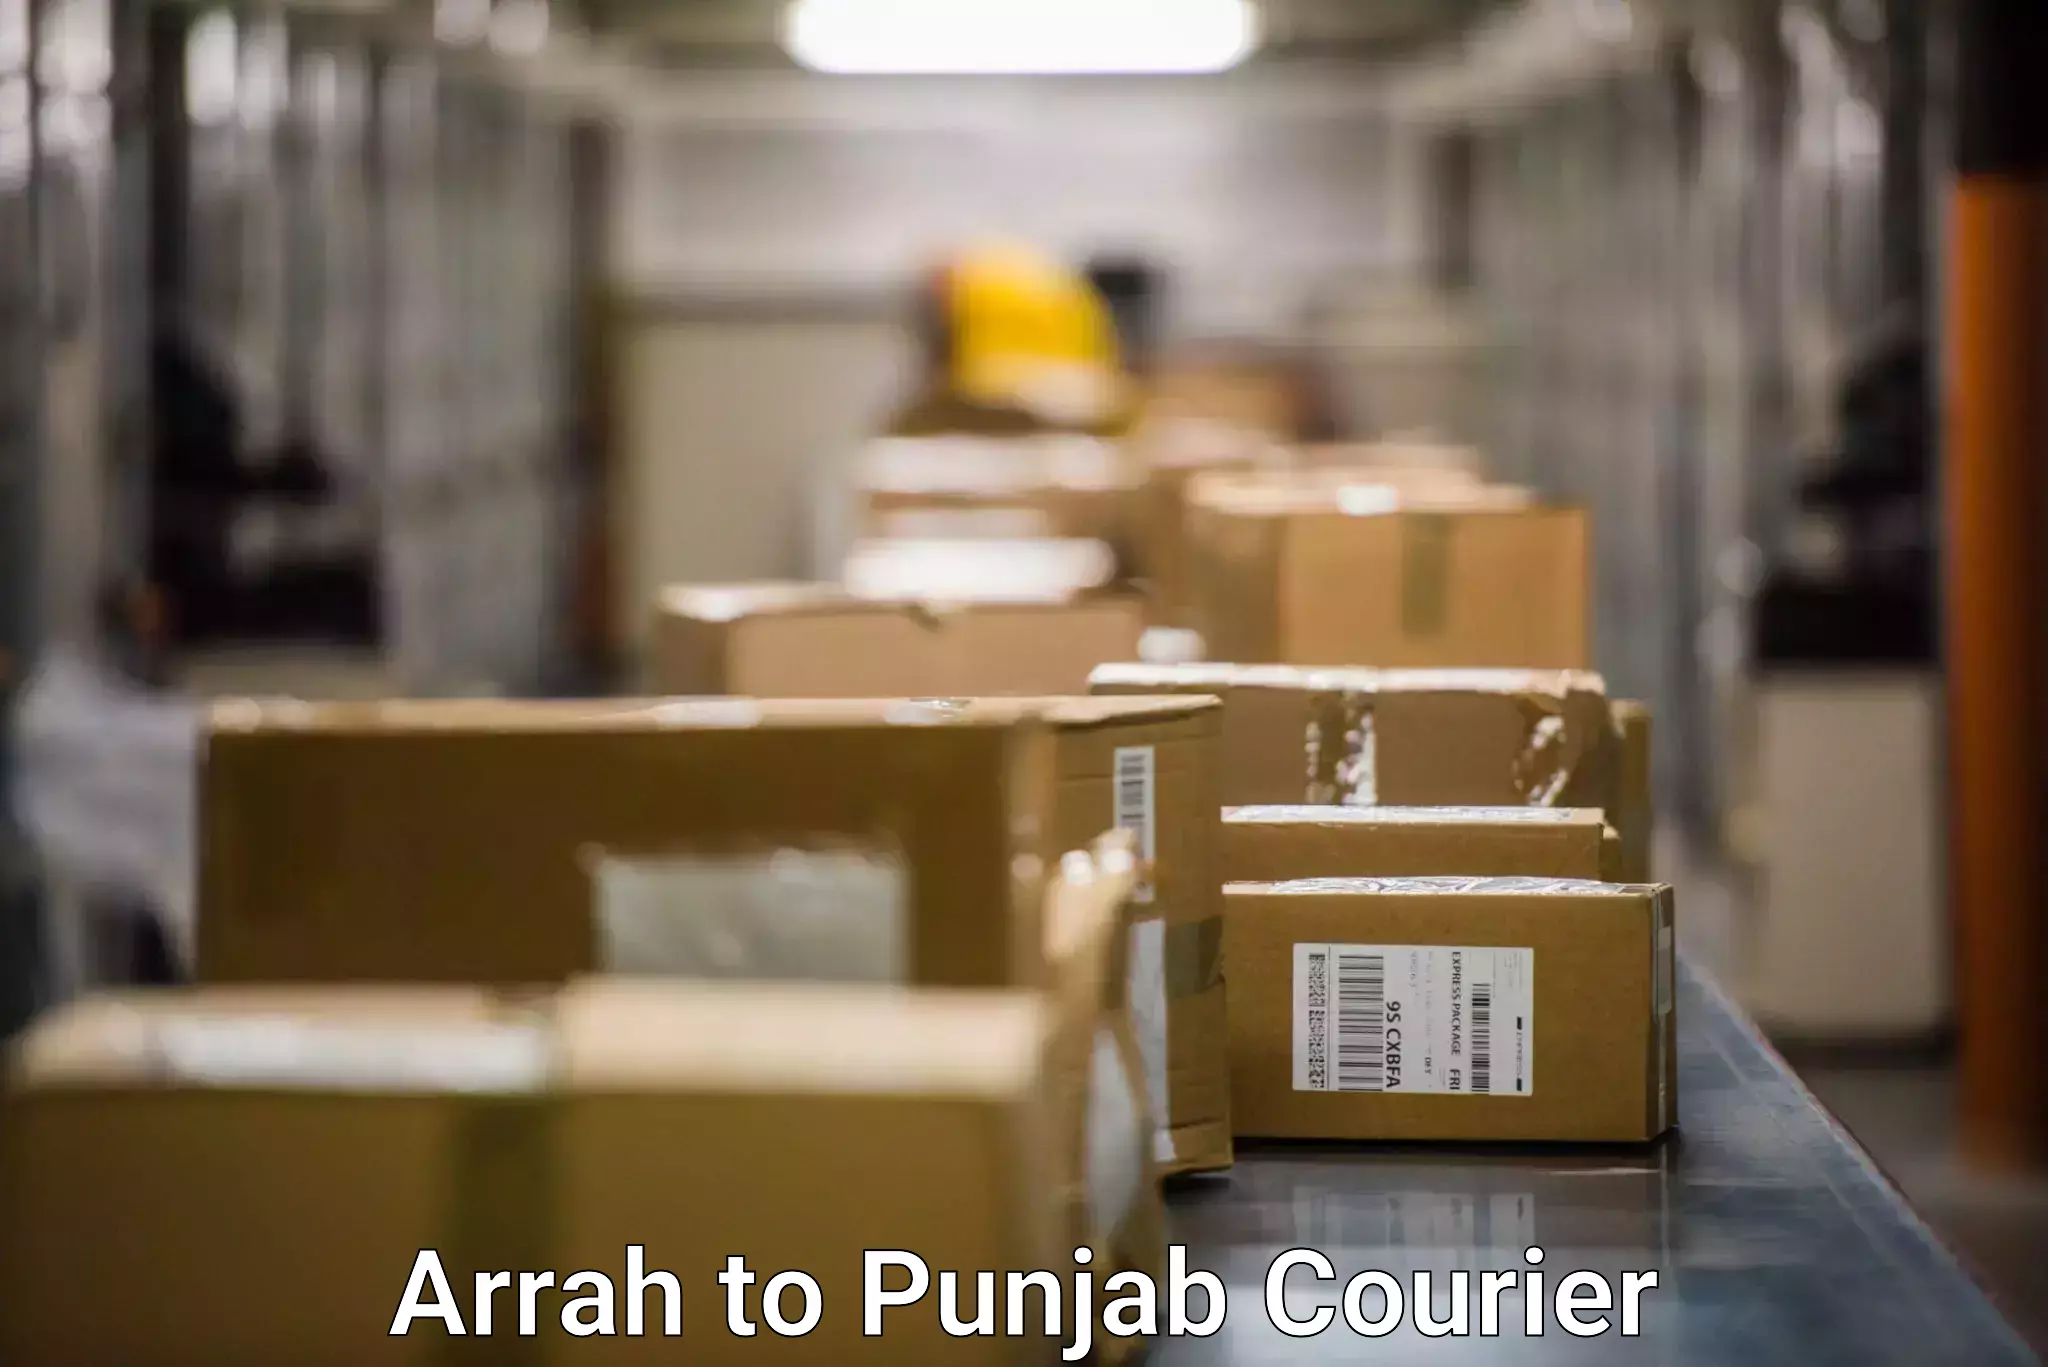 Global shipping networks Arrah to Mohali